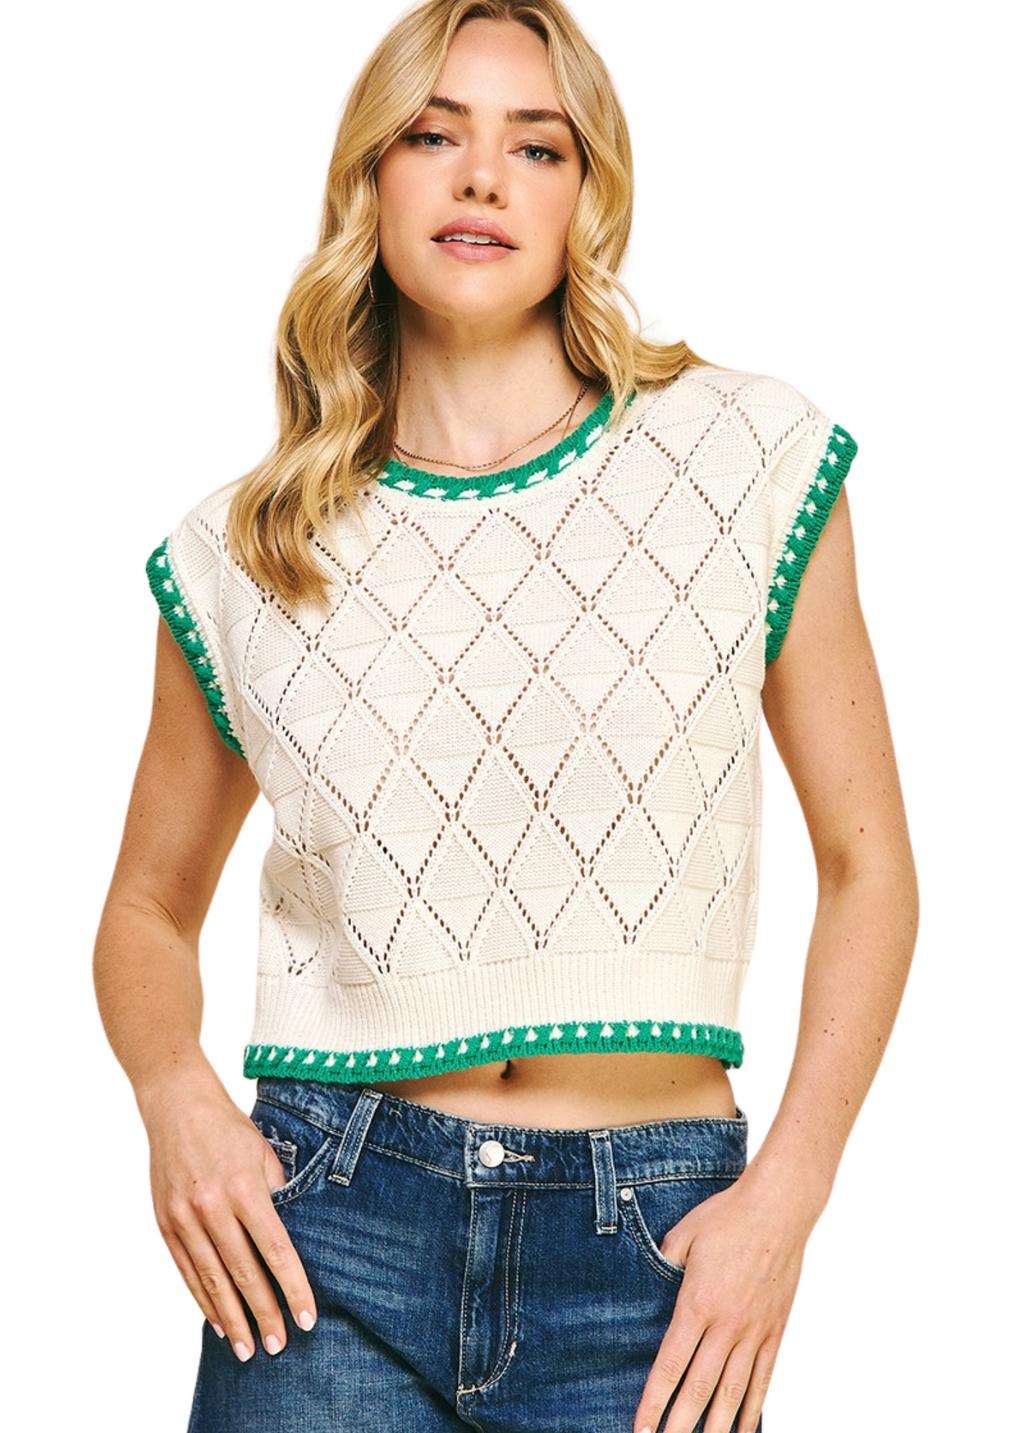 Kenzie Embroidered Sweater Vest